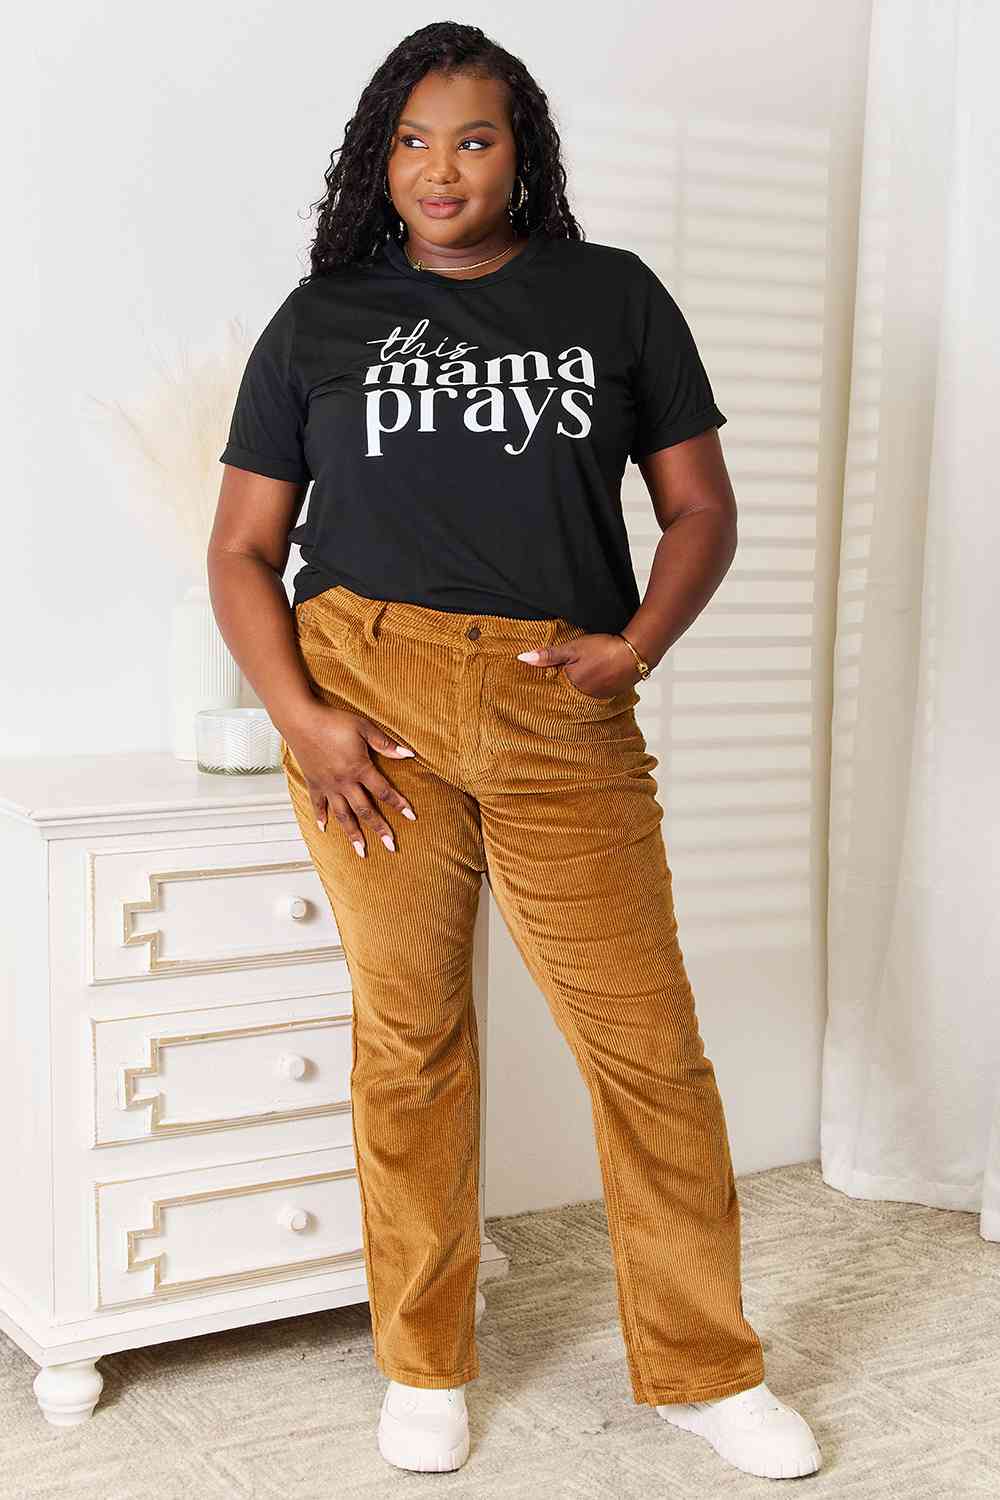 Simply Love THIS MAMA PRAYS Graphic T-Shirt - Posh Country Lifestyle Marketplace